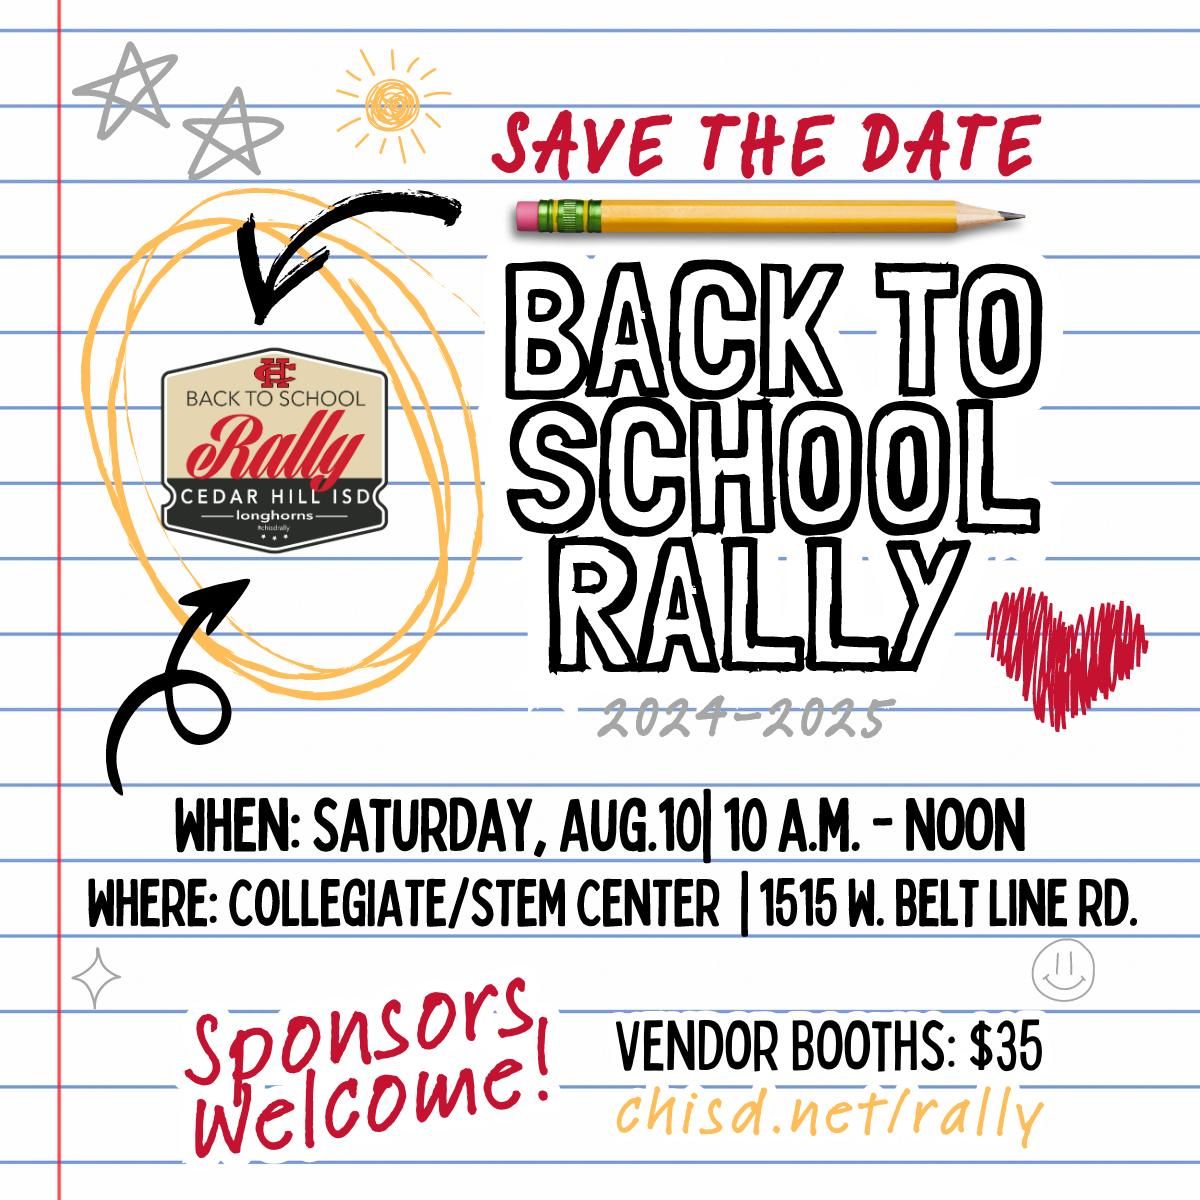 CHISD Back To School Rally